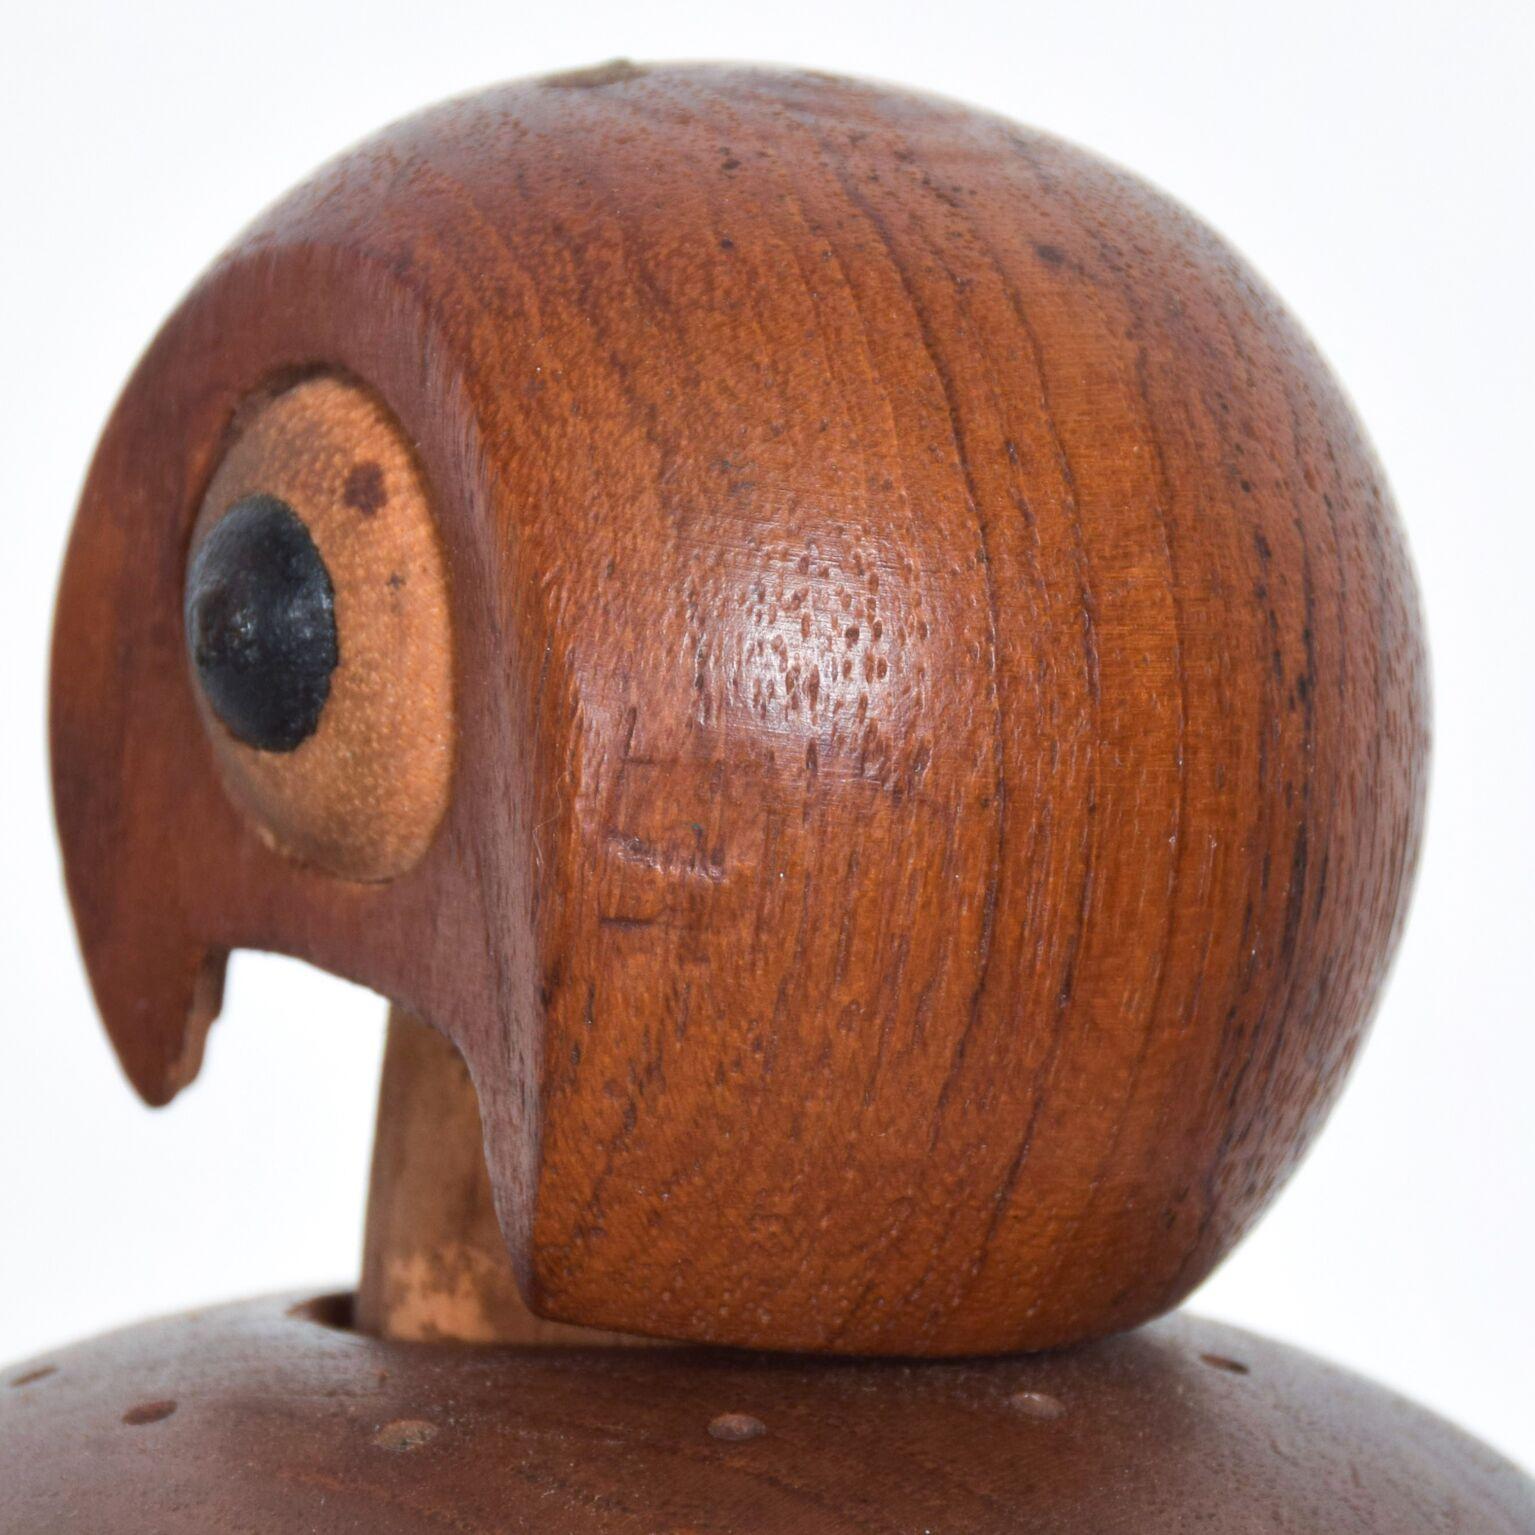 
Adorable PARROT Bottle Stopper Cork in Teak Wood Danish Modern Vintage, 1960s
Dimensions: 2.5 x 2 in diameter
Original Vintage Item Condition. Wear and use appropriate to age. 
See images.
